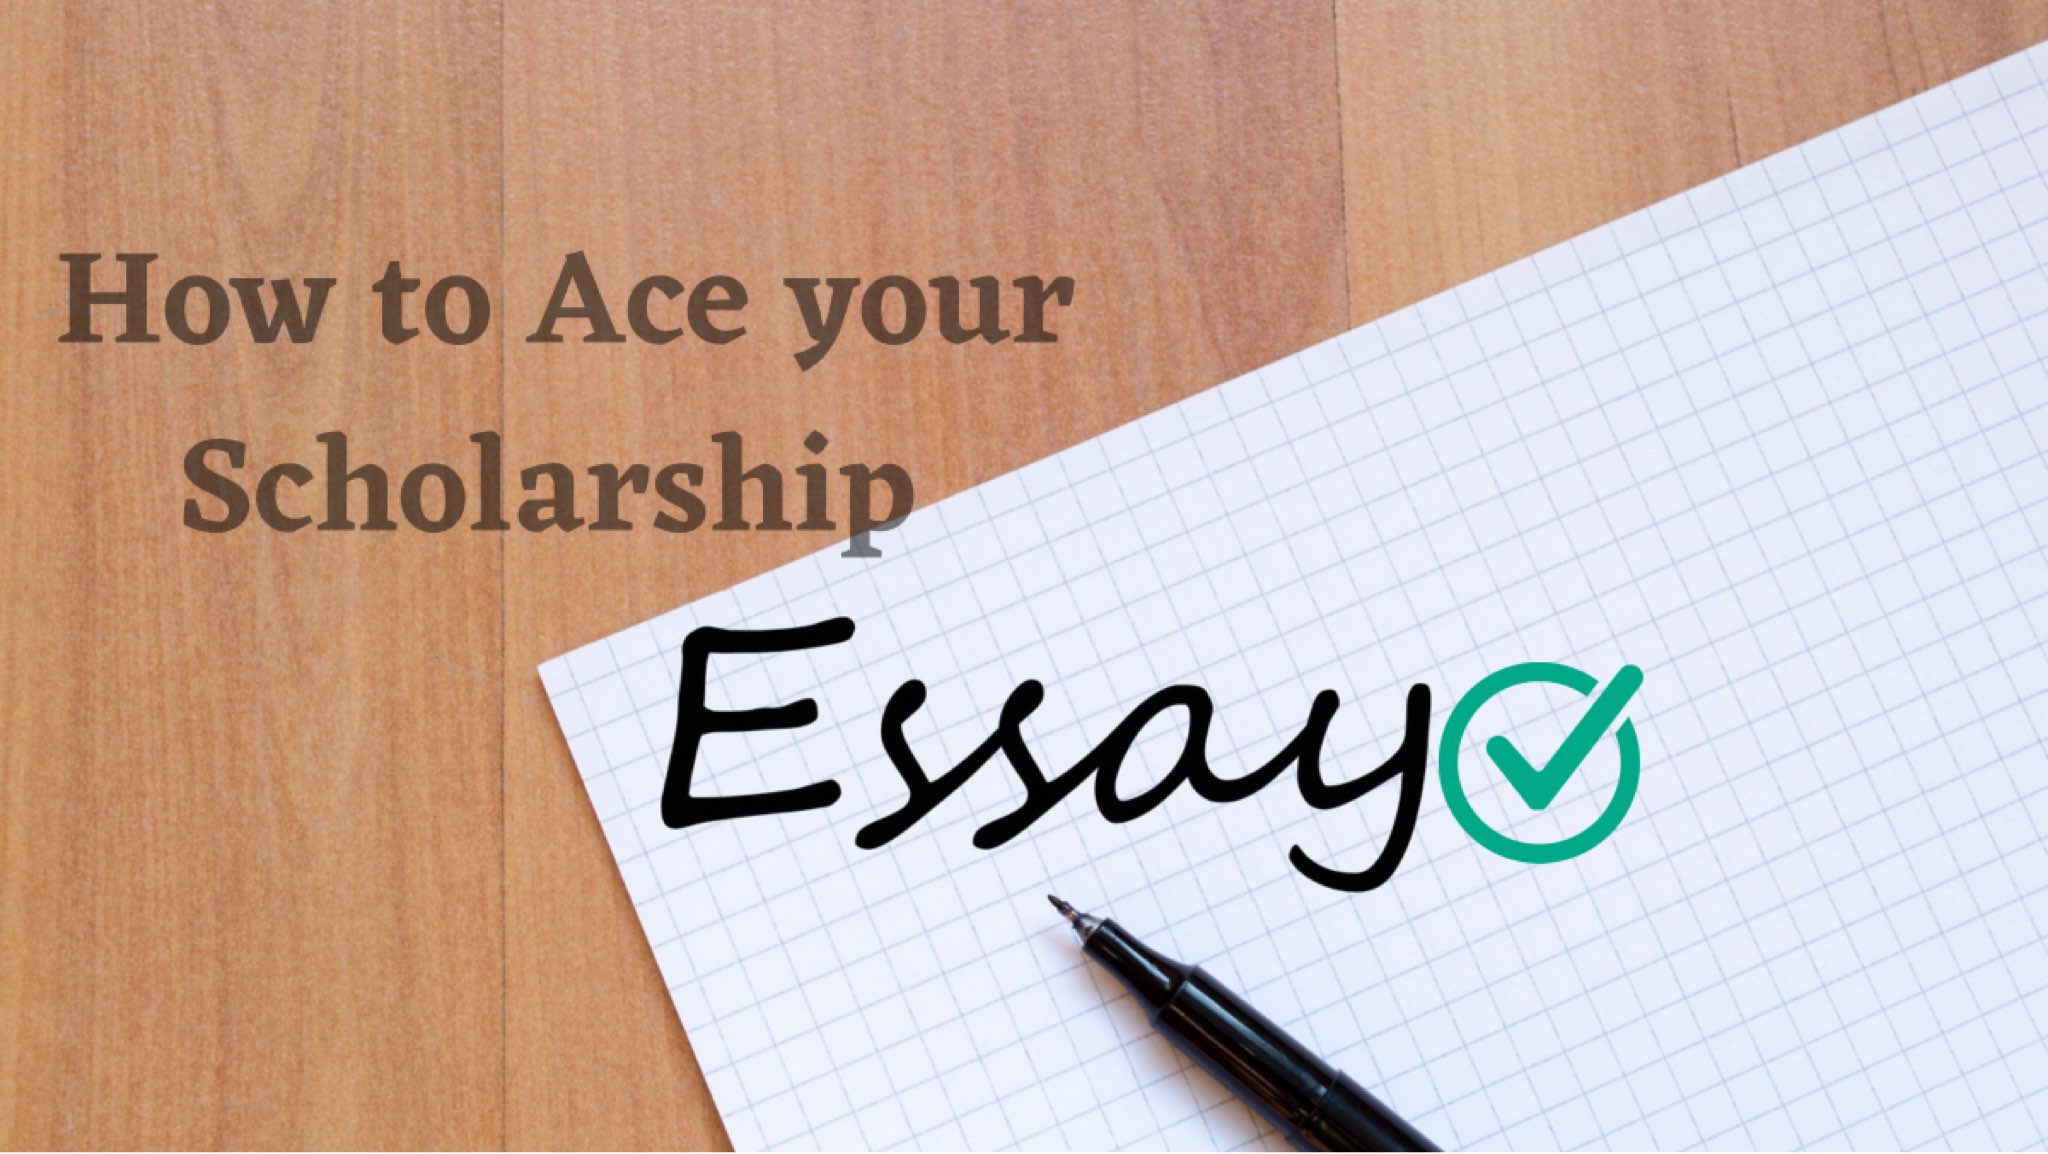 How to ace your scholarship essay